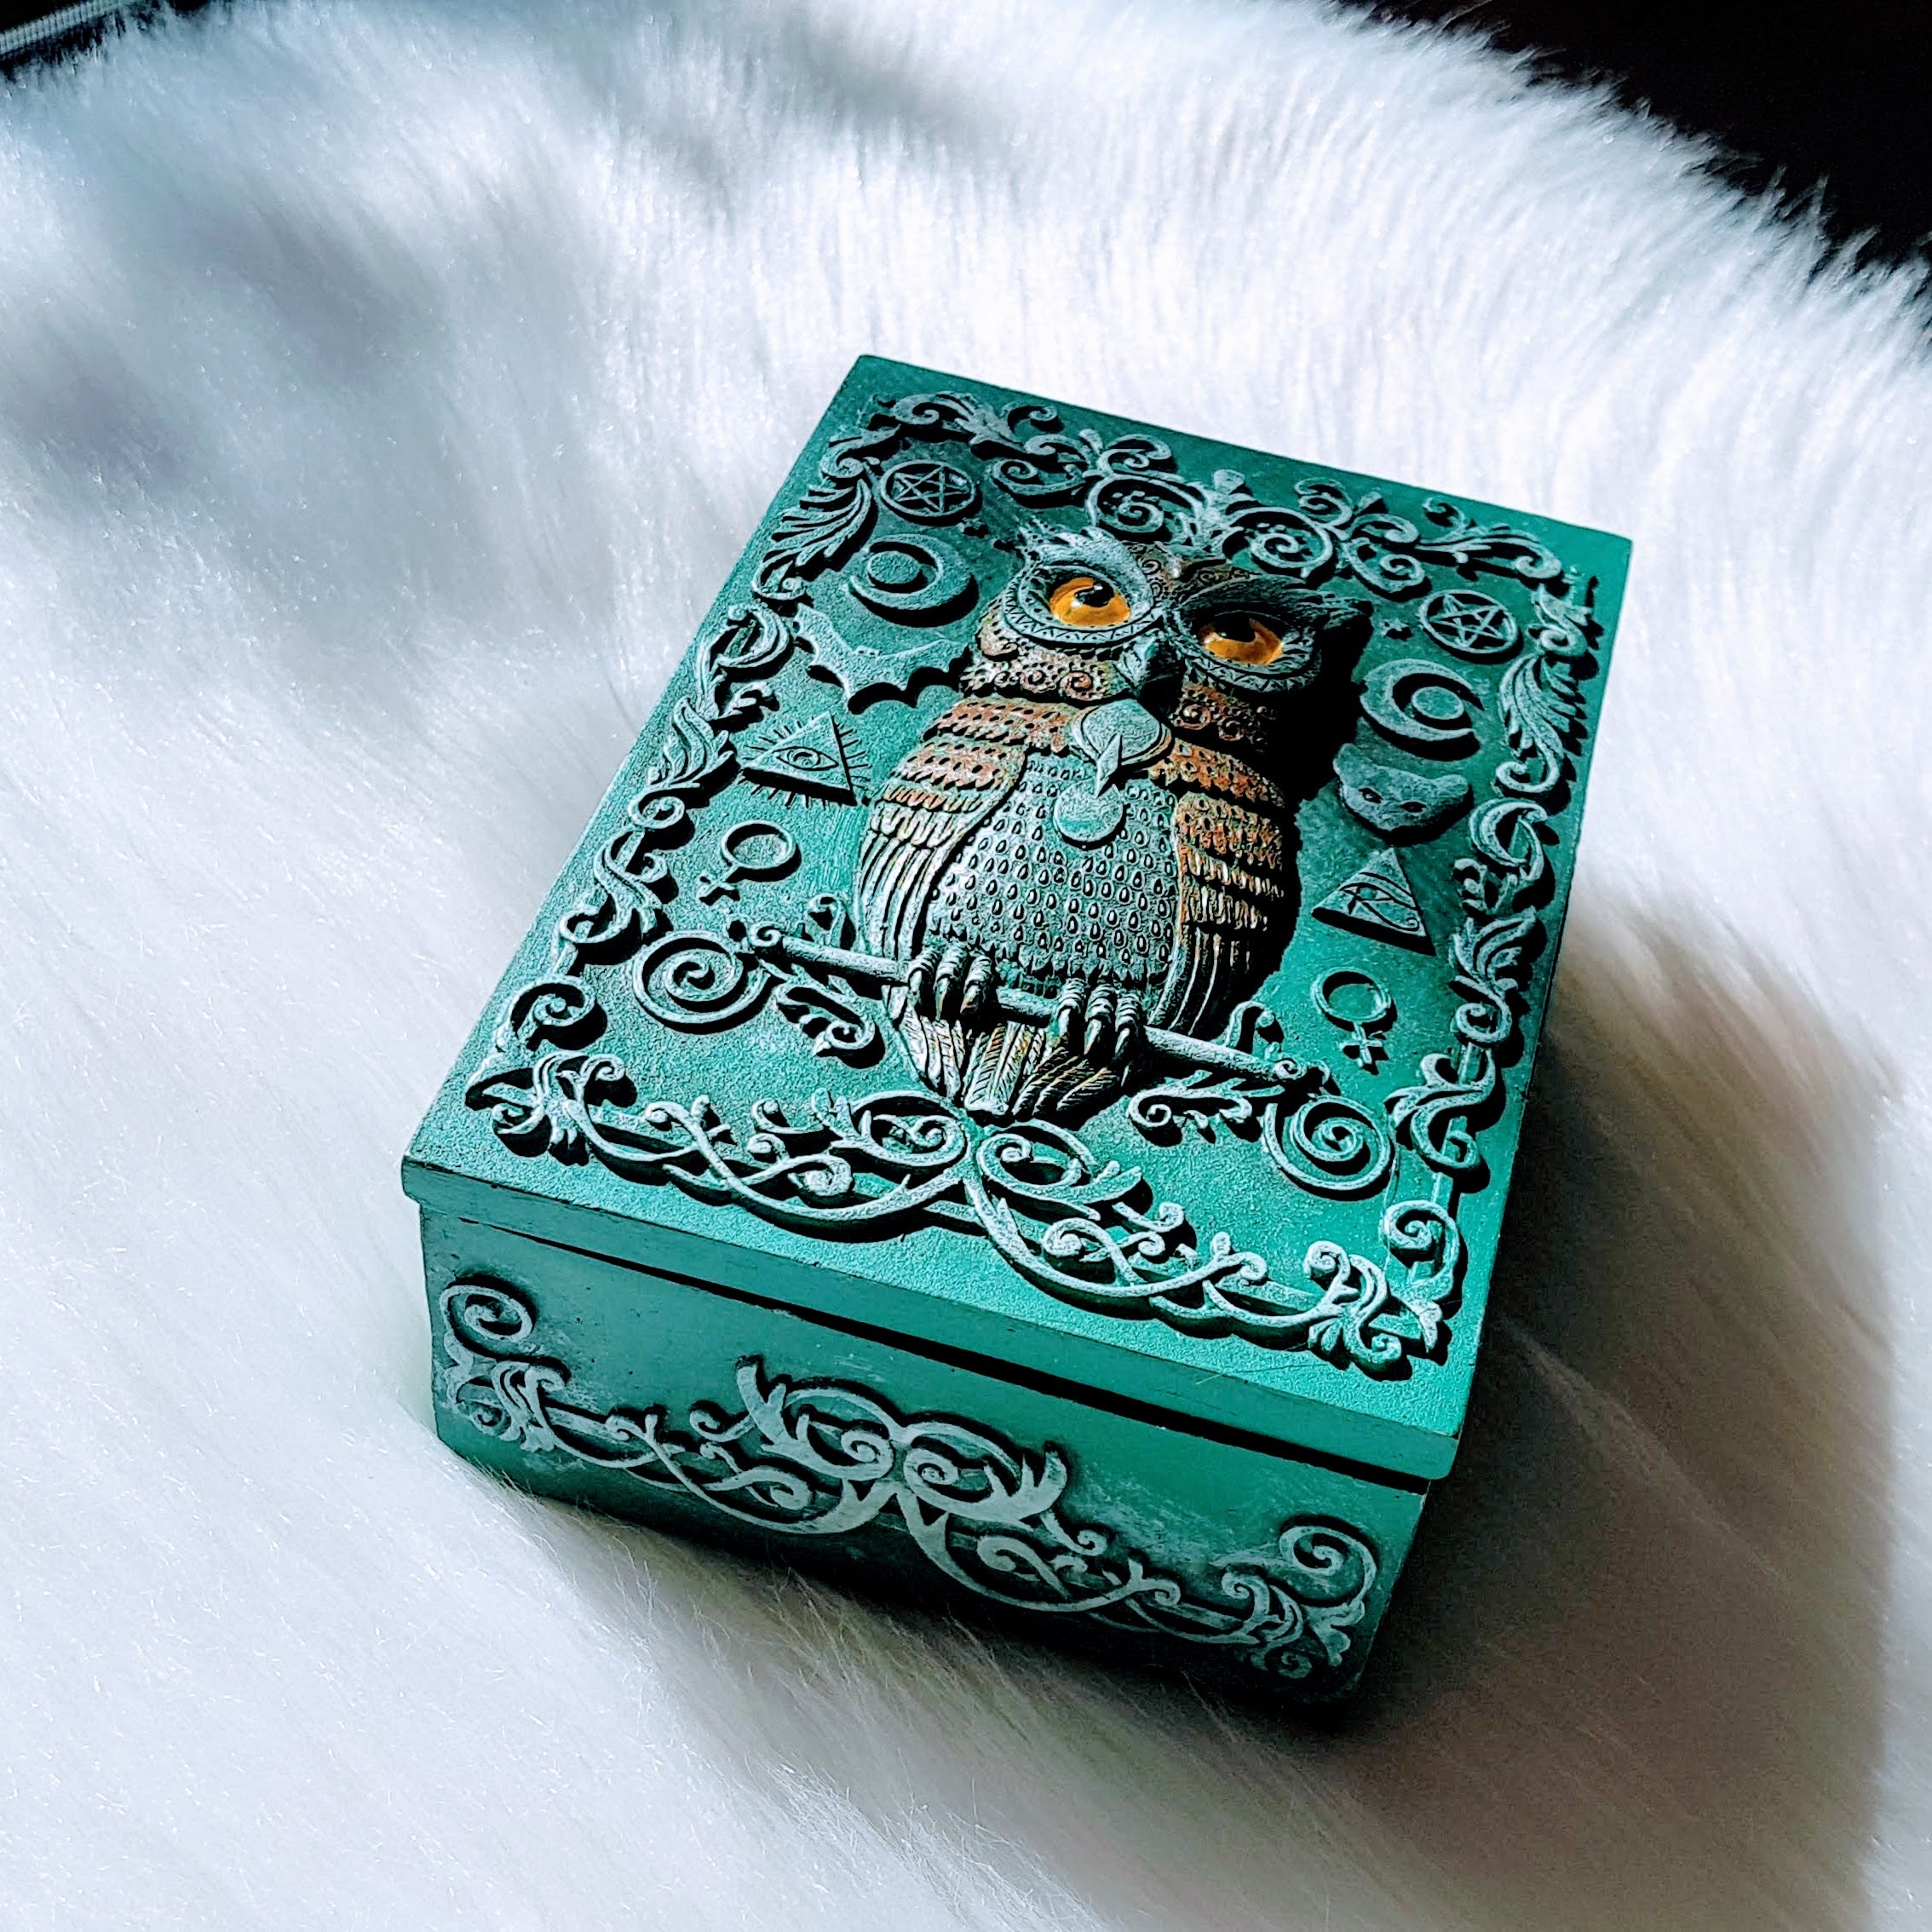 Magical Wise Little Owl Box